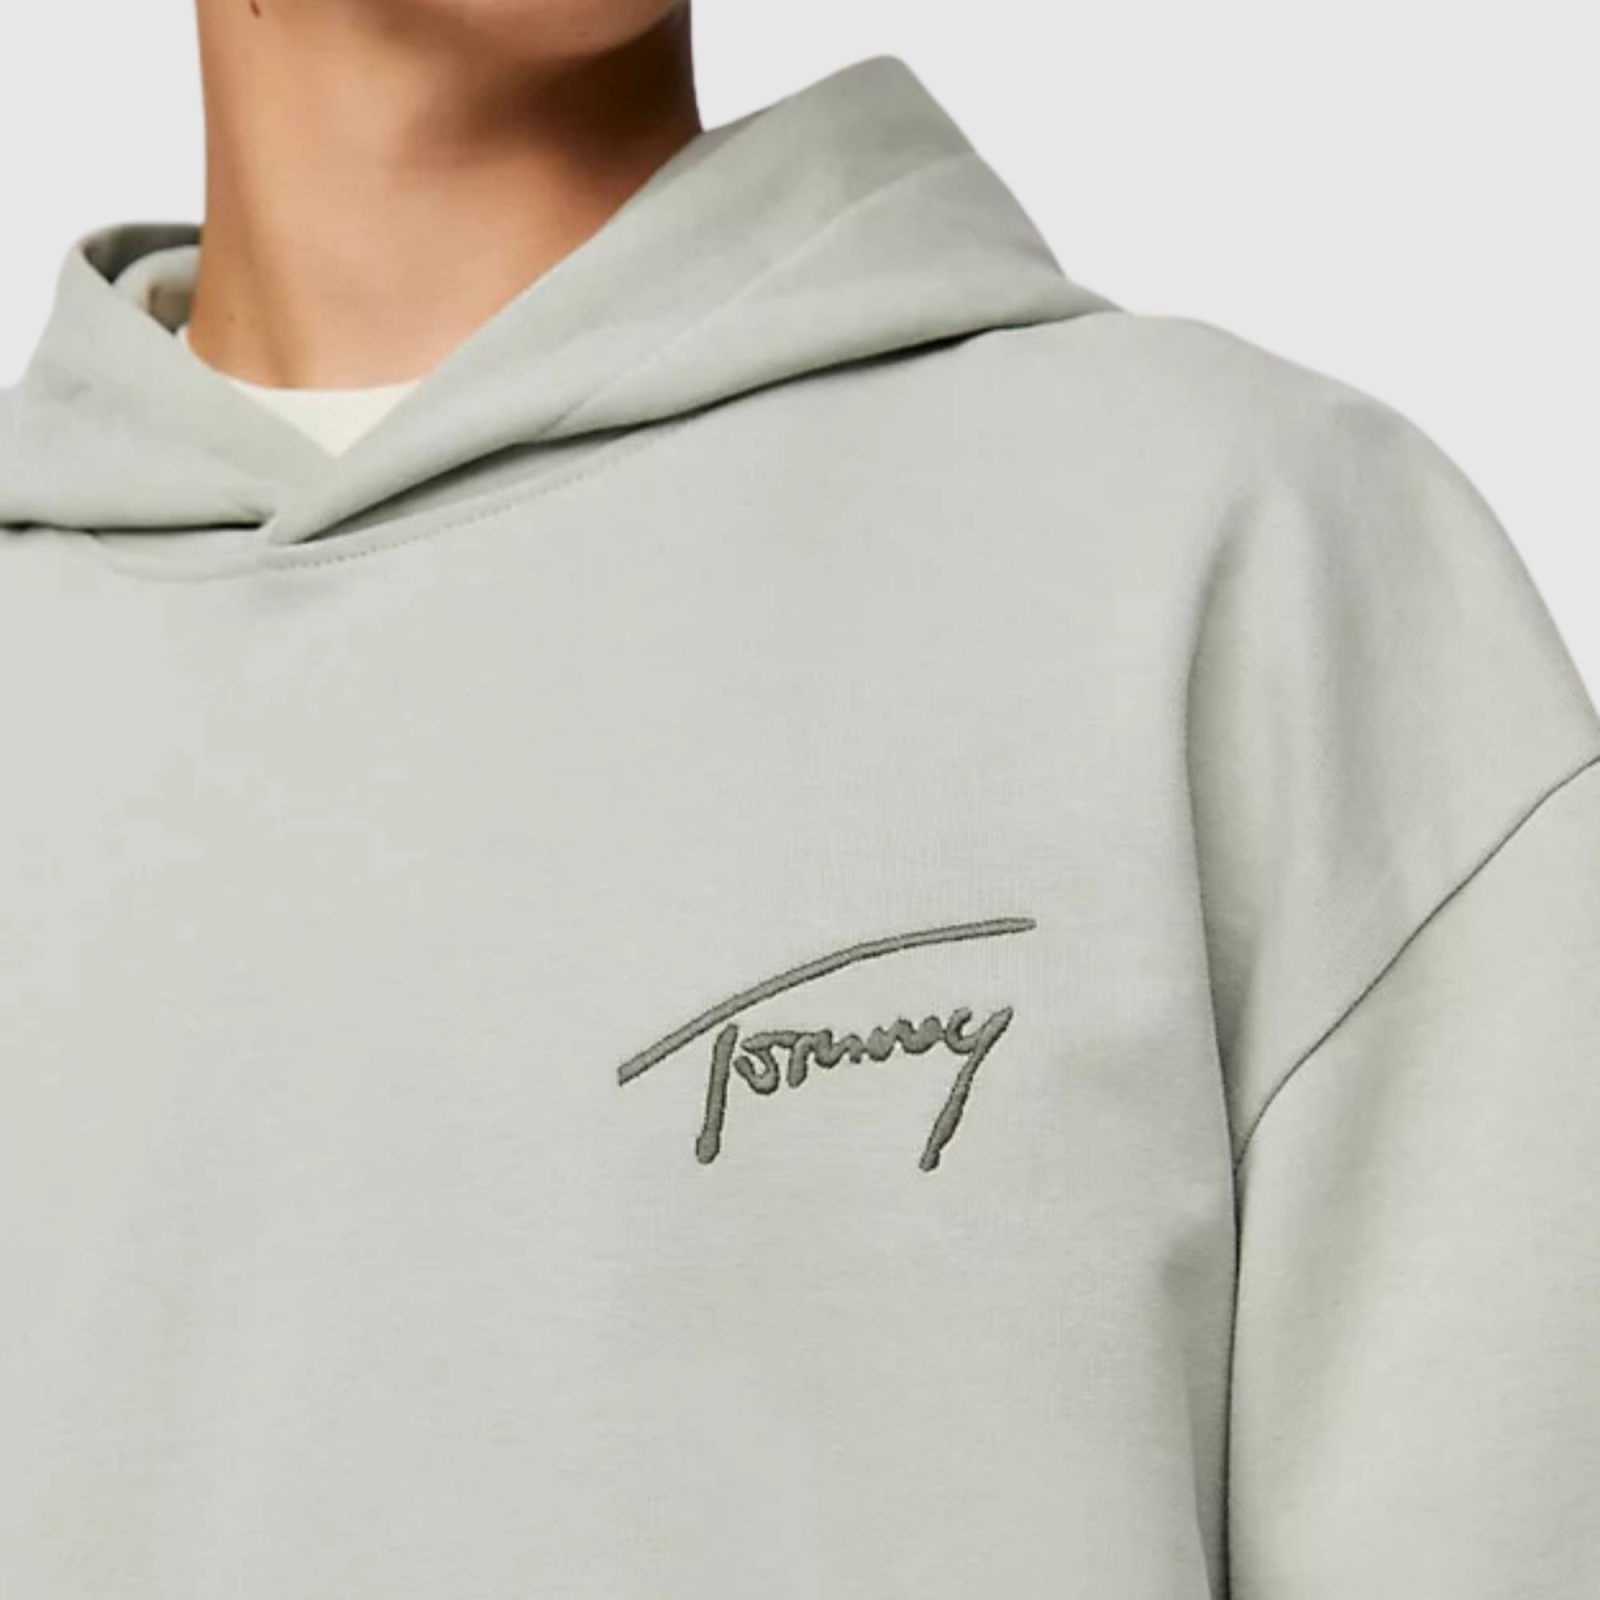 TOMMY RELAXED SIGNATURE HOODIE